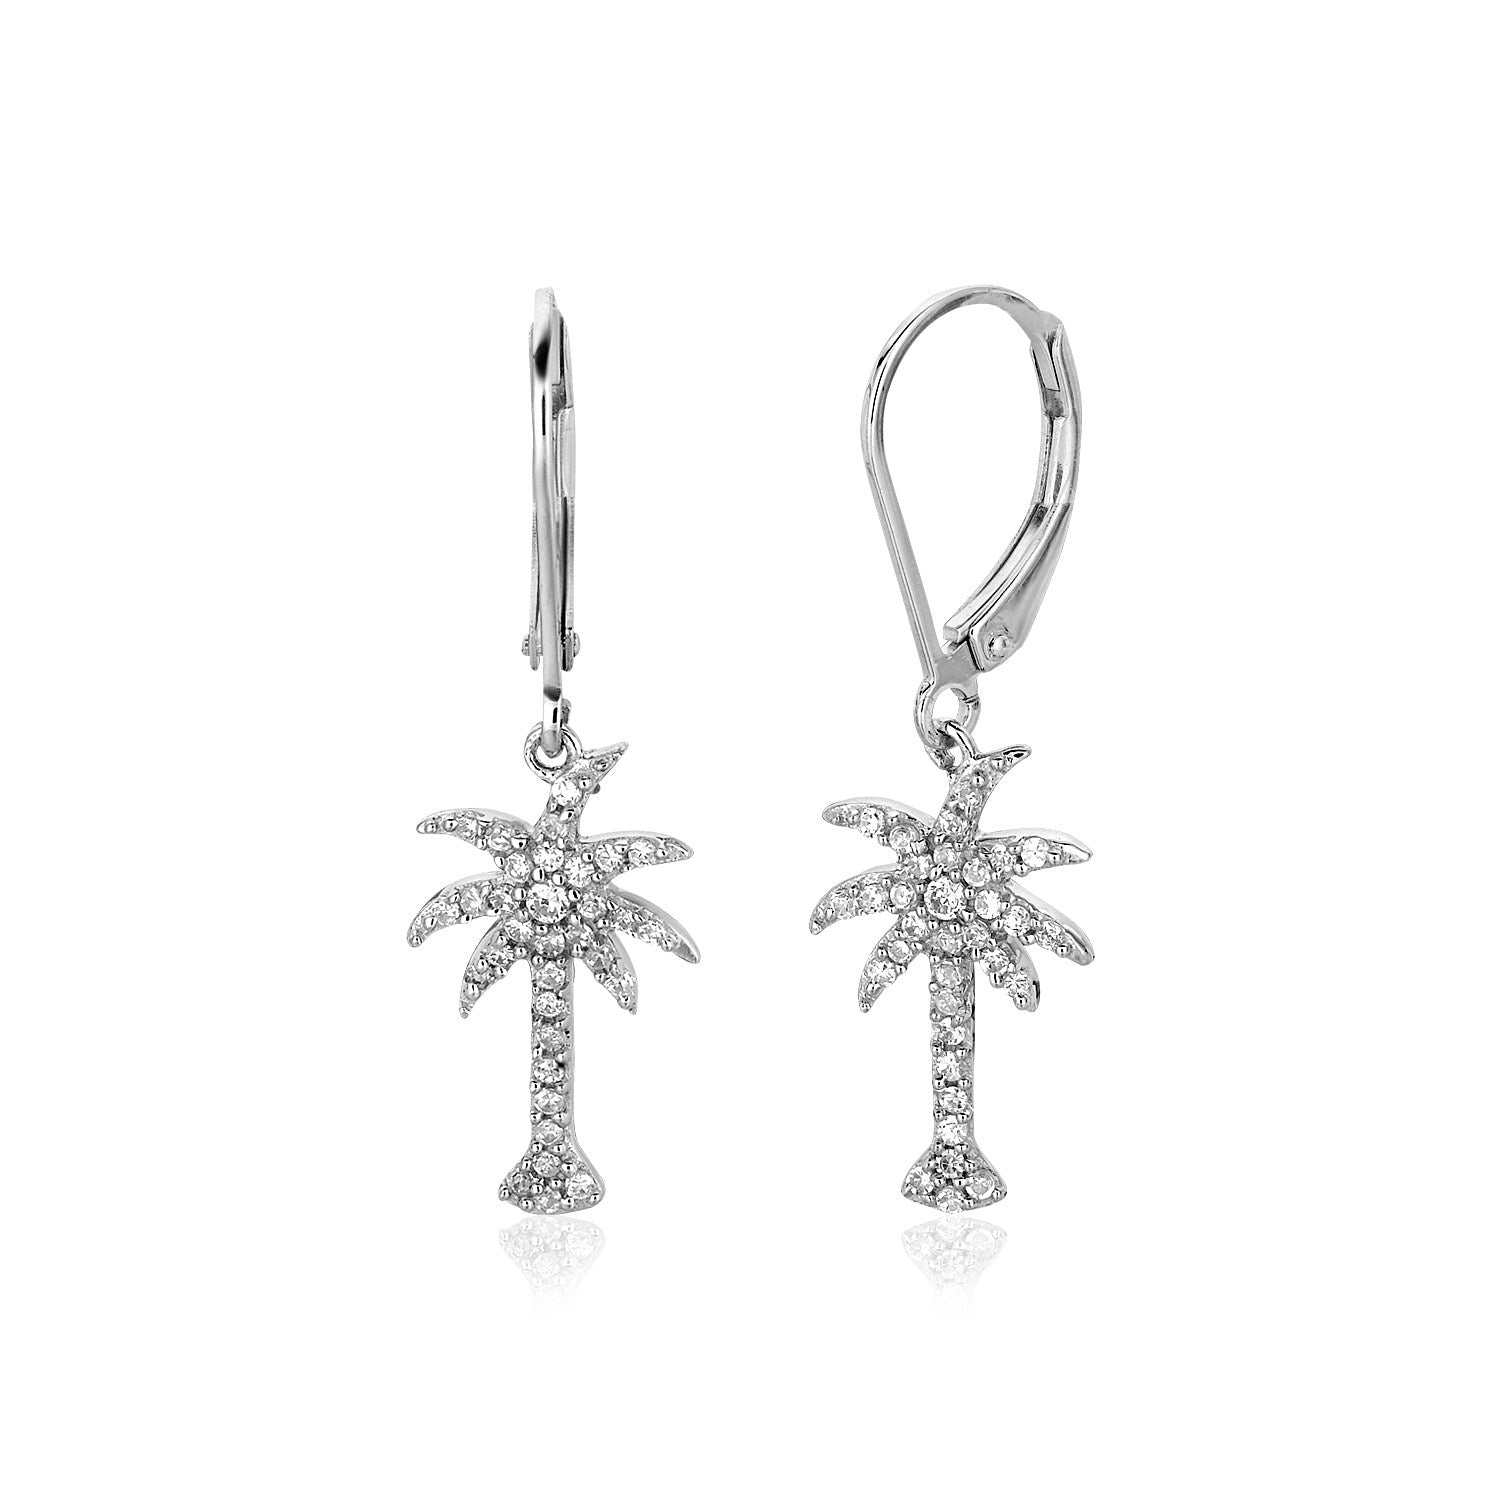 Sterling Silver Palm Tree Dangle Earrings with Cubic Zirconias